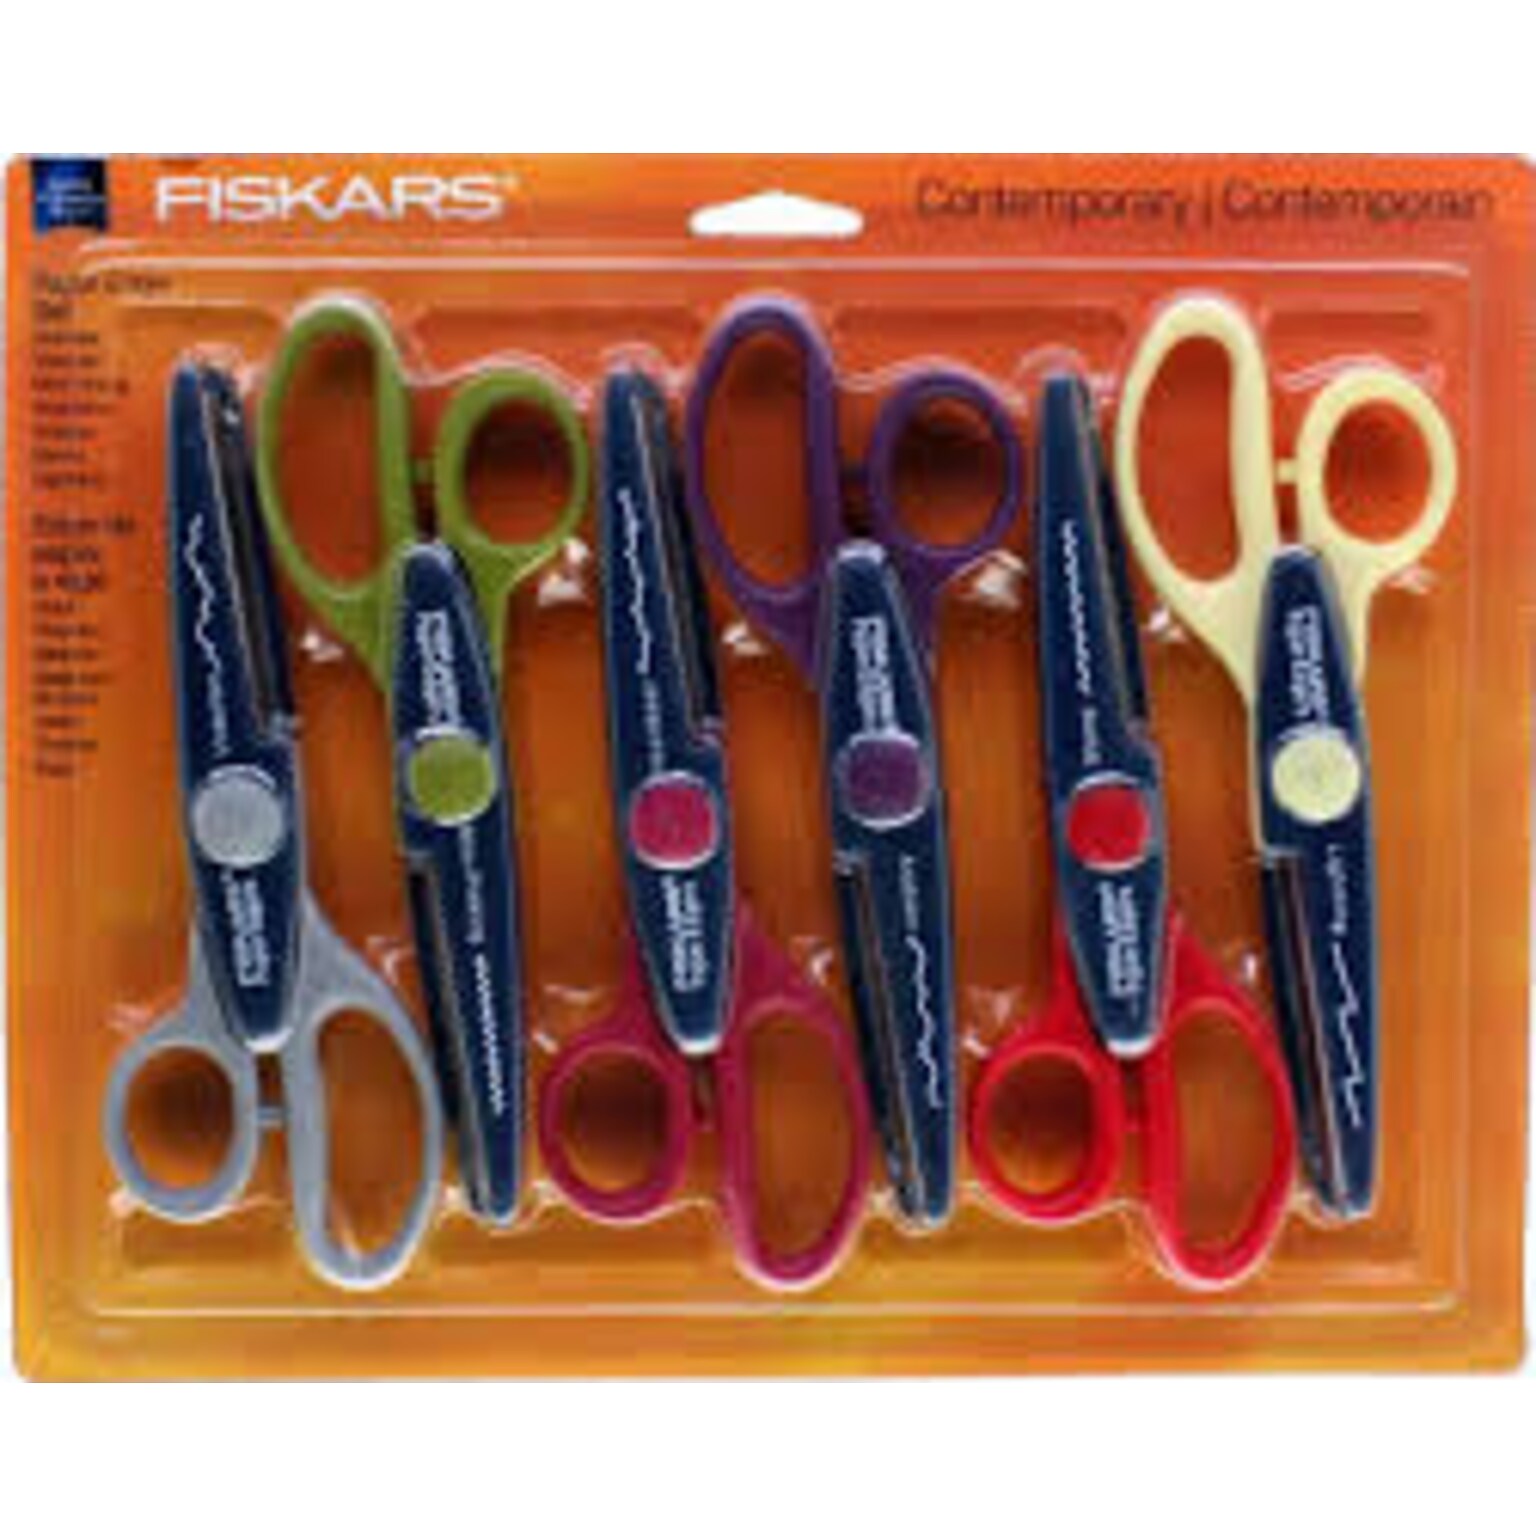 Fiskars Decorative 6 1/2 Stainless Steel Craft Scissors, Pointed Tip, Assorted Colors, 6/Pack (SZ667)